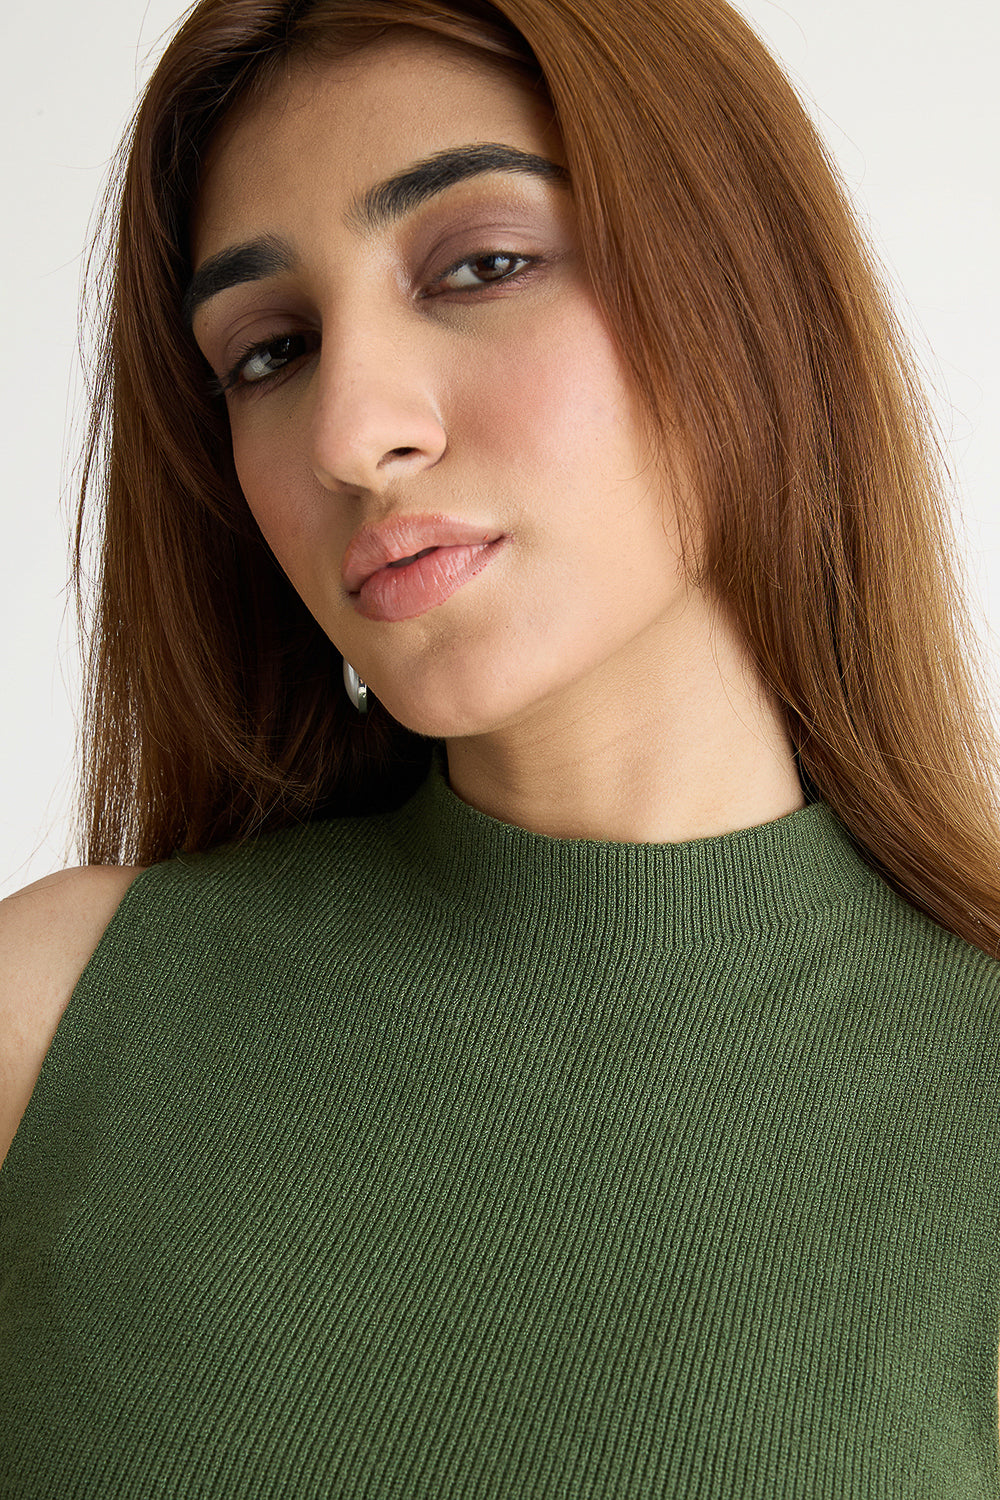 RIBBED TURTLE NECK OLIVE GREEN TOP